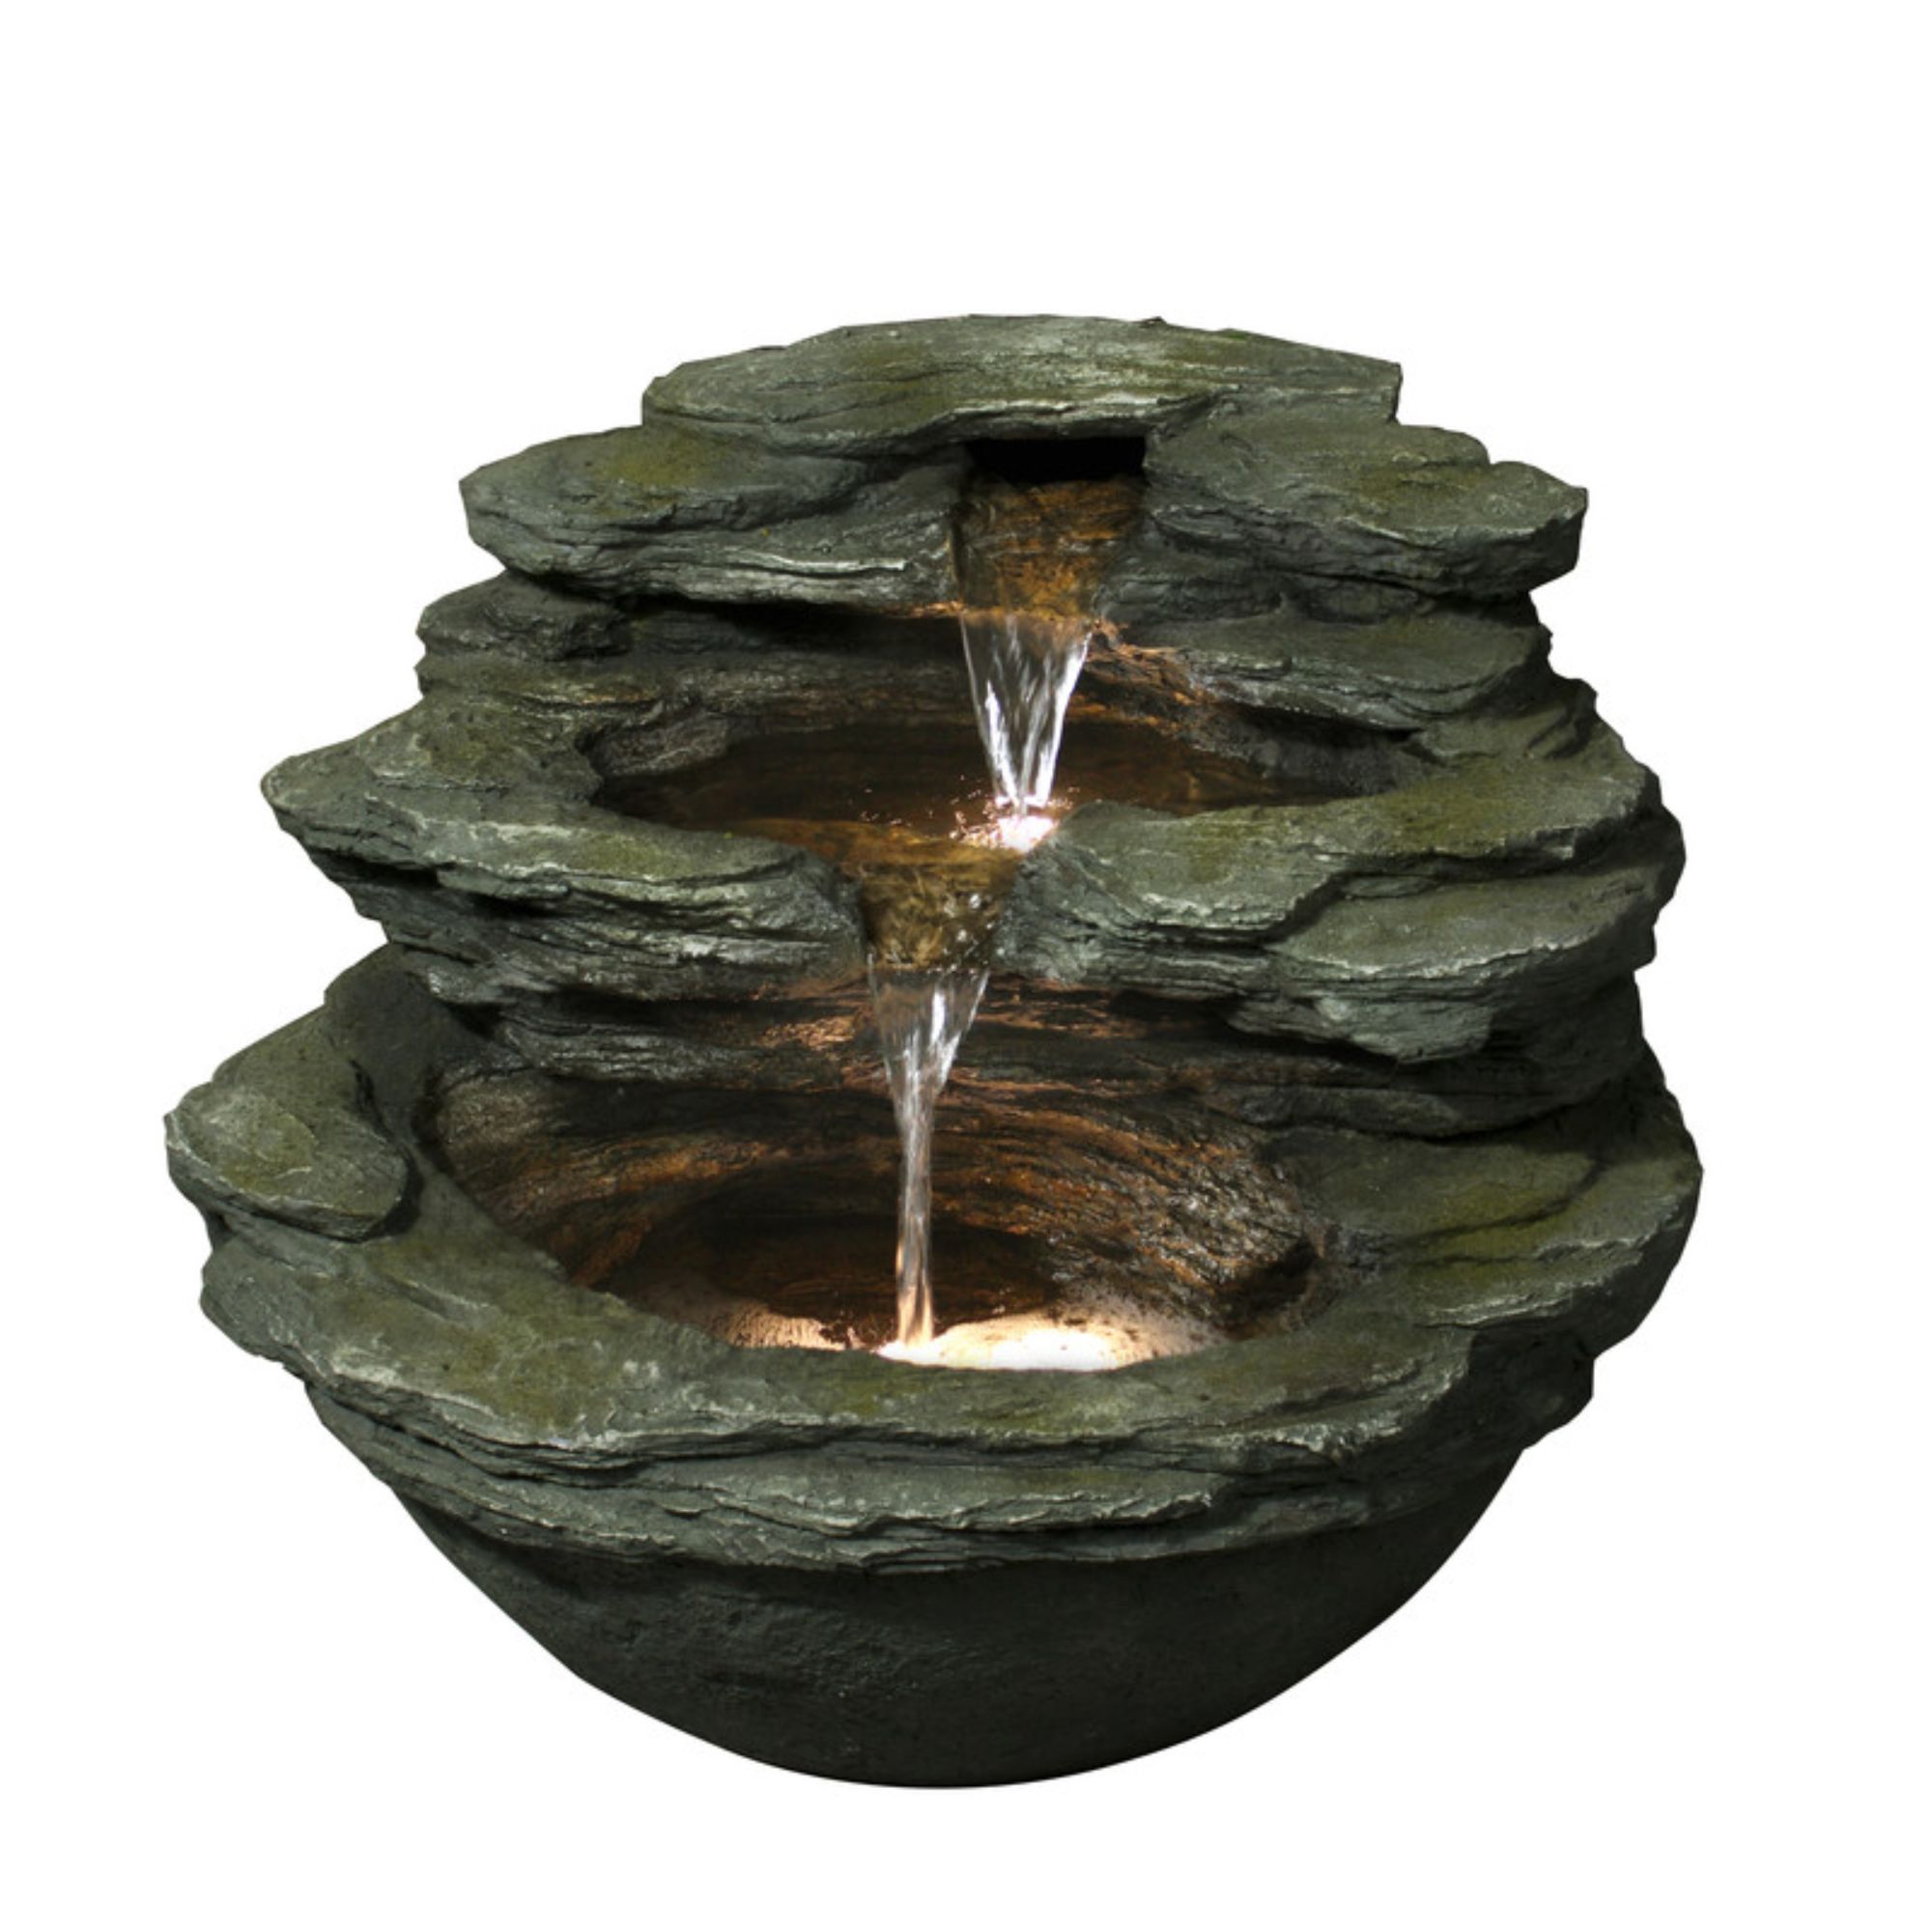 Outdoor Living and Style 21.5" Stone Gray, Moss Green, and Beige Resin Decorative and Inspiring Calistoga Springs Fountain